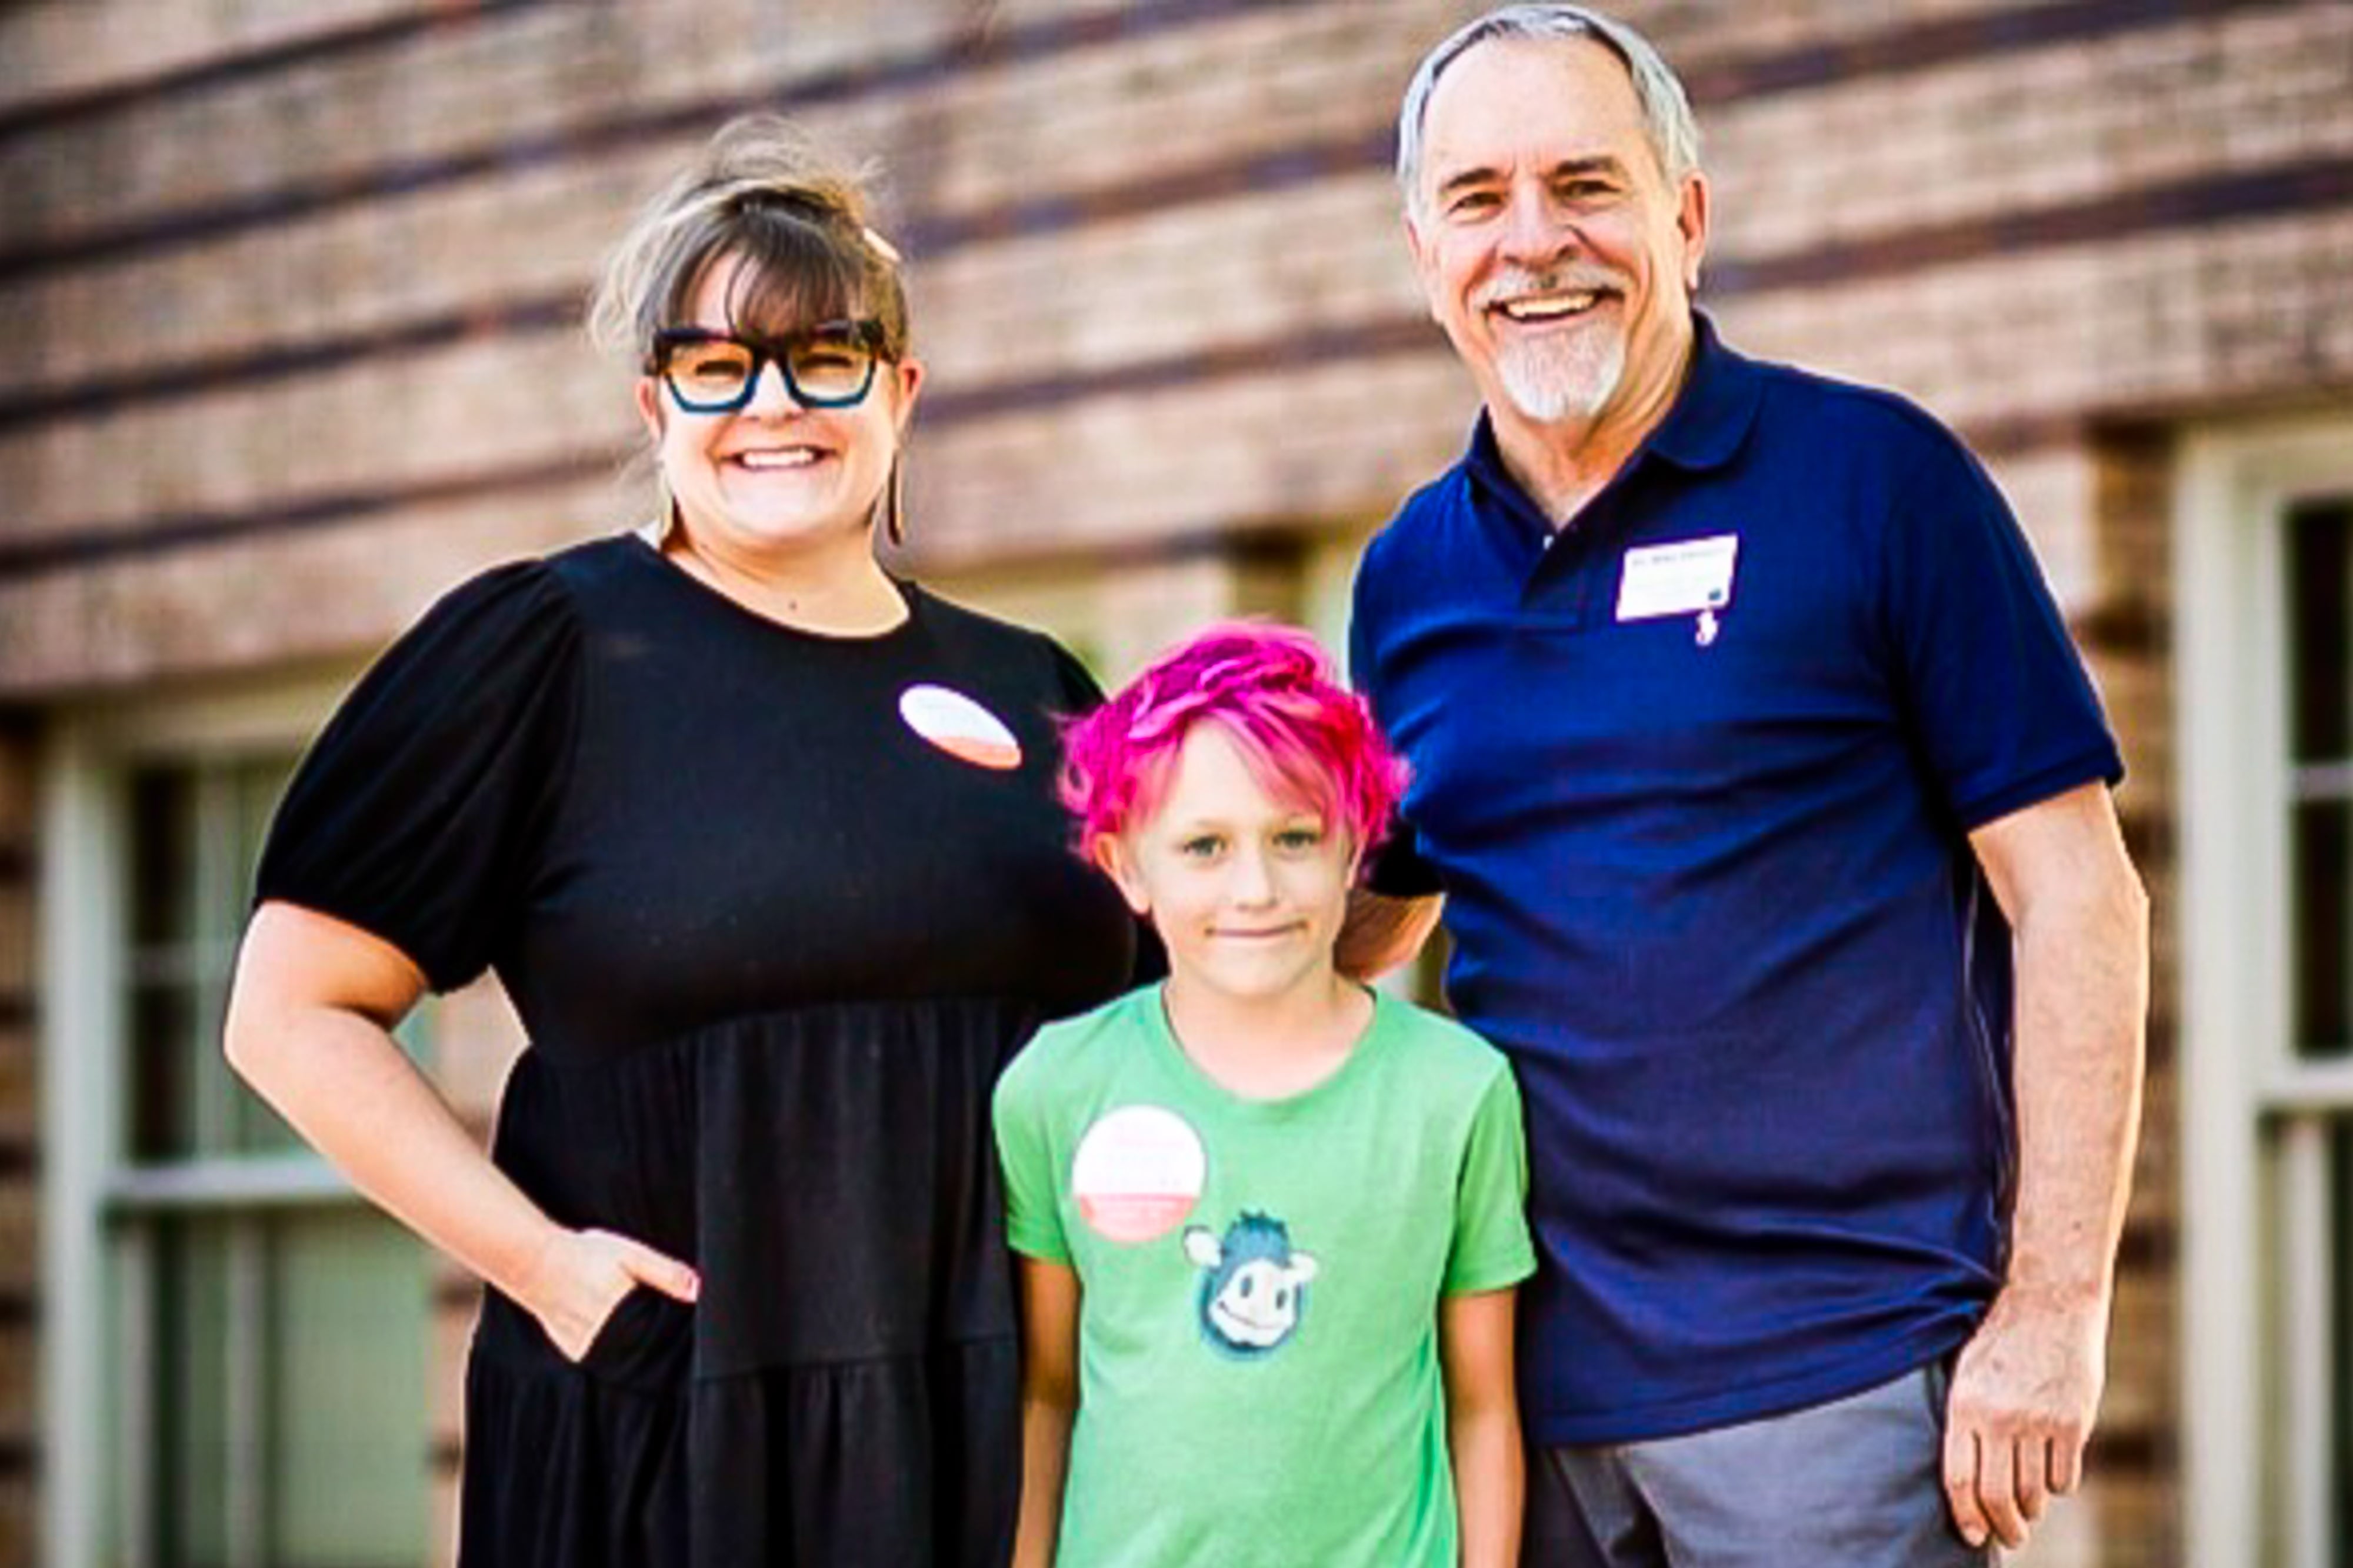 Denver school board candidate Mike DeGuire, in a blue polo shirt, stands in front of a wooden wall and windows, with his daughter, wearing a black dress, and his grandson in a lime green shirt and whose hair is dyed hot pink.